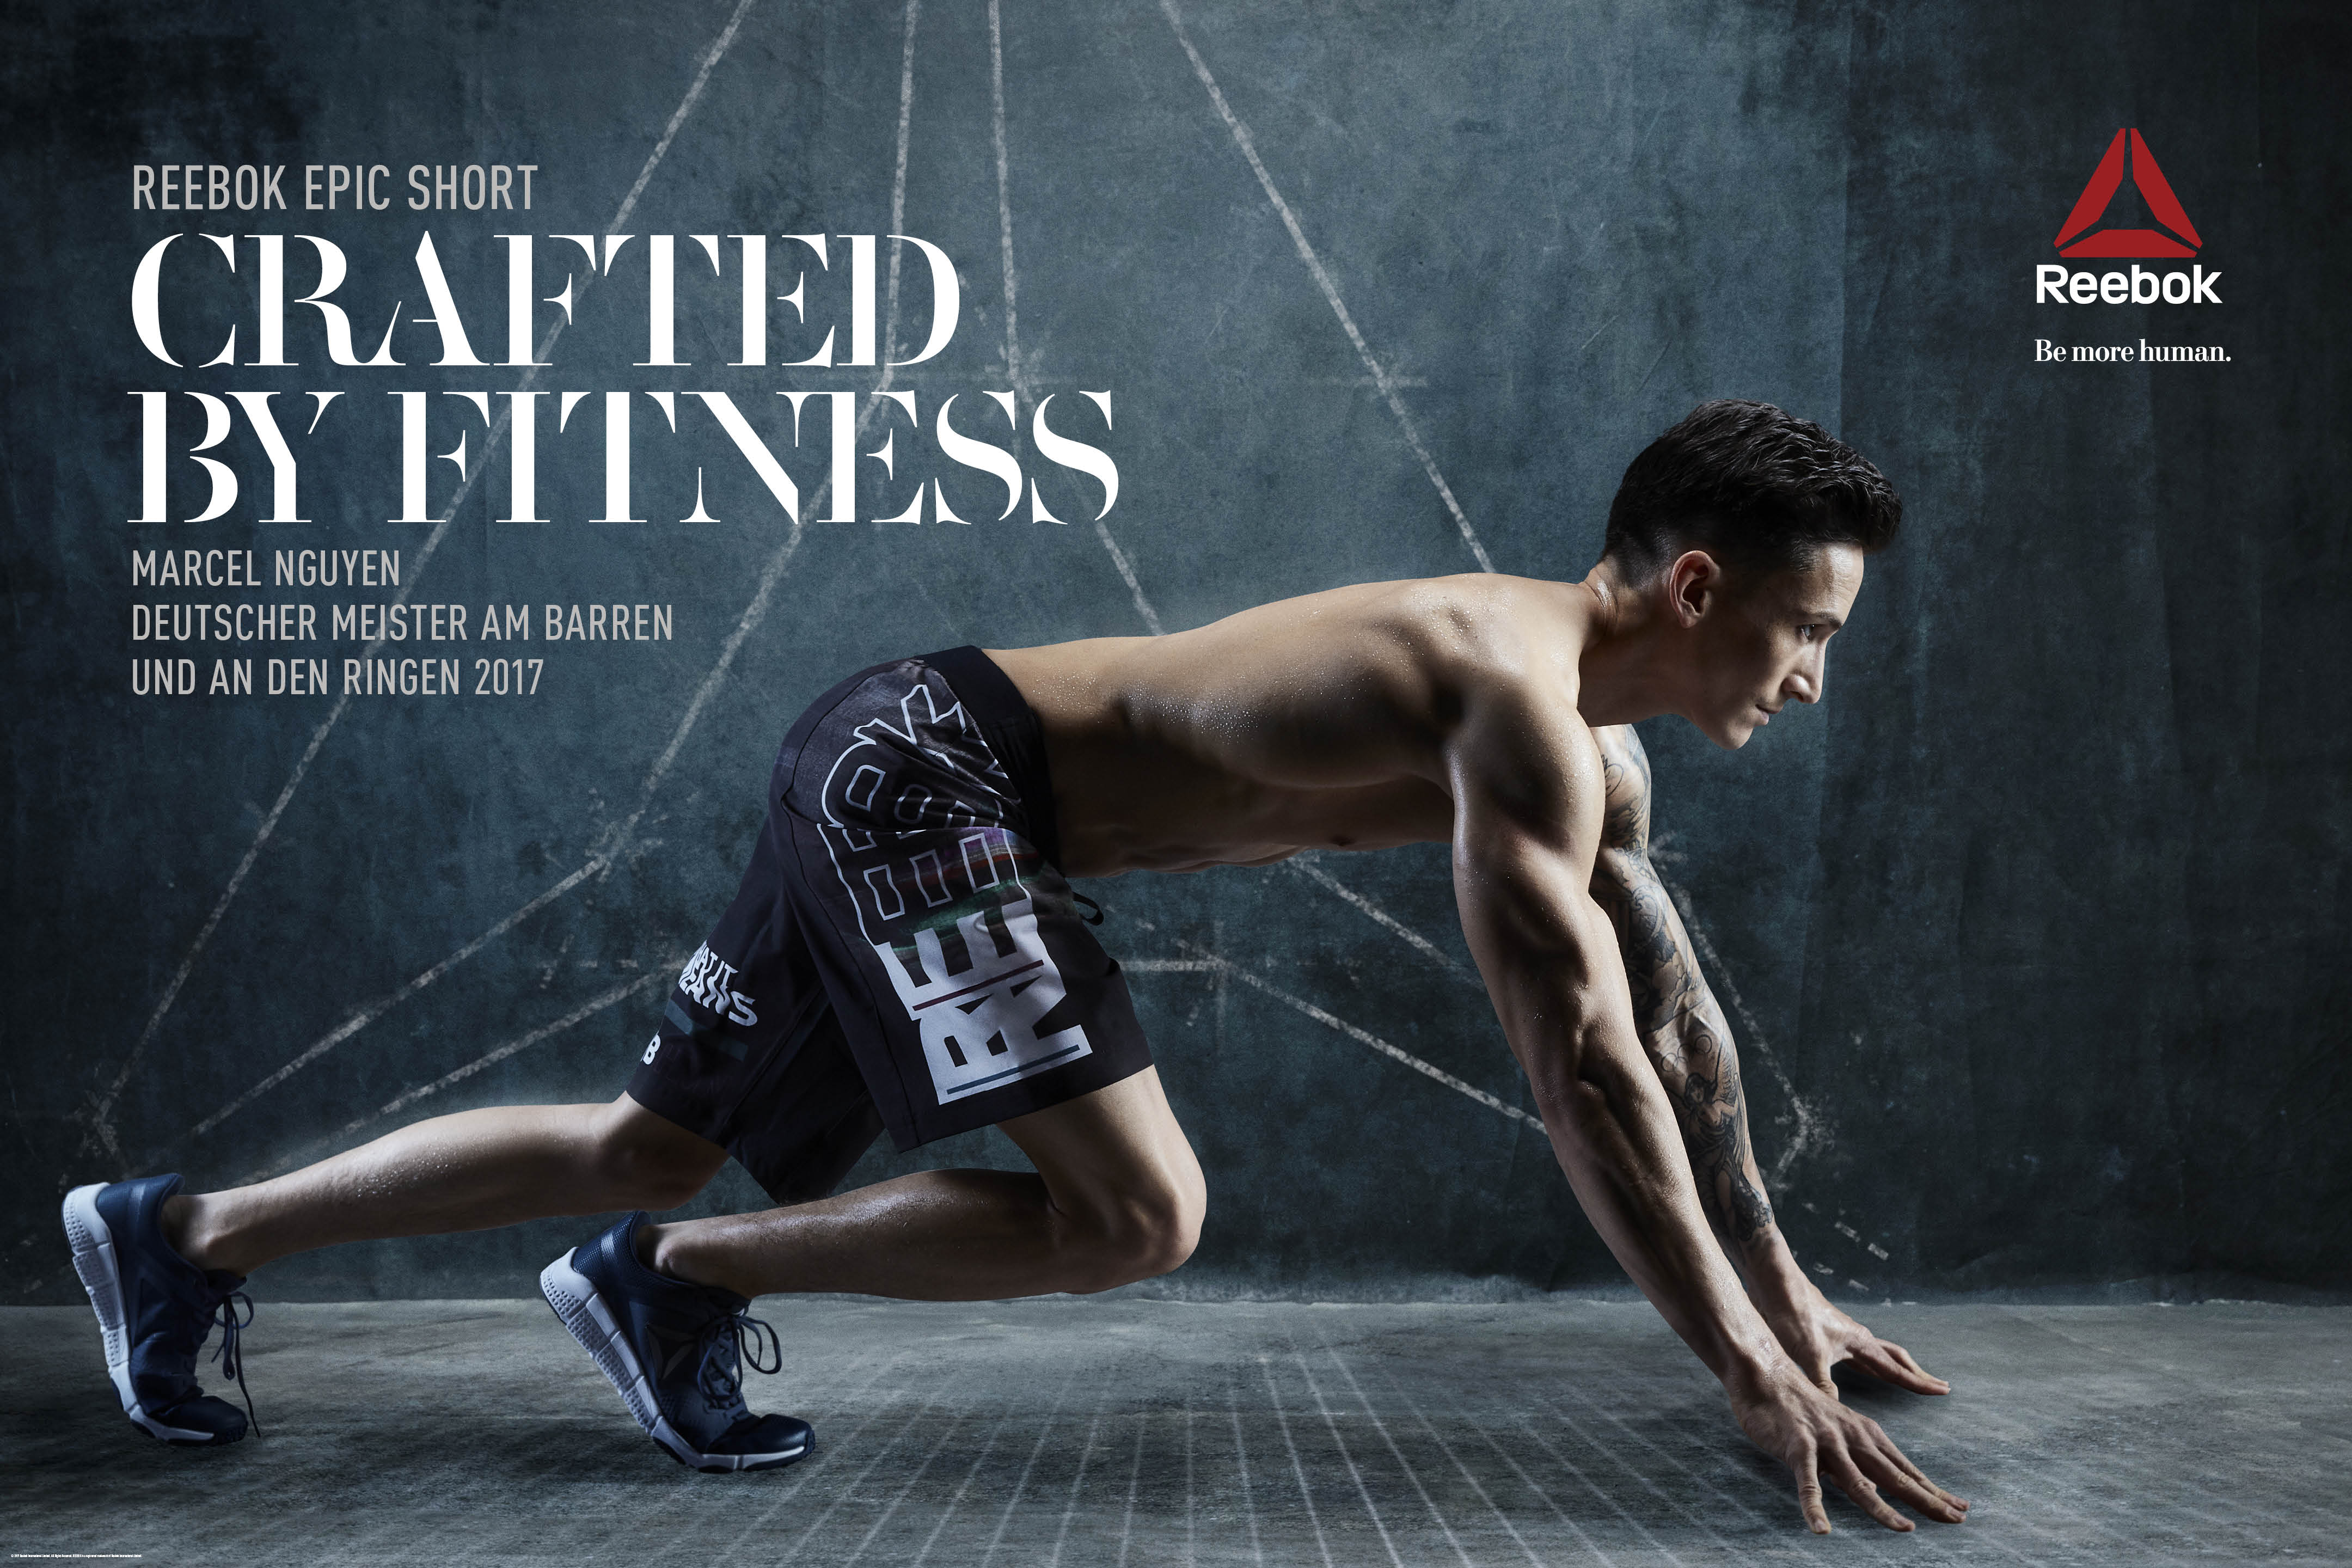 Reebok: Crafted by Fitness